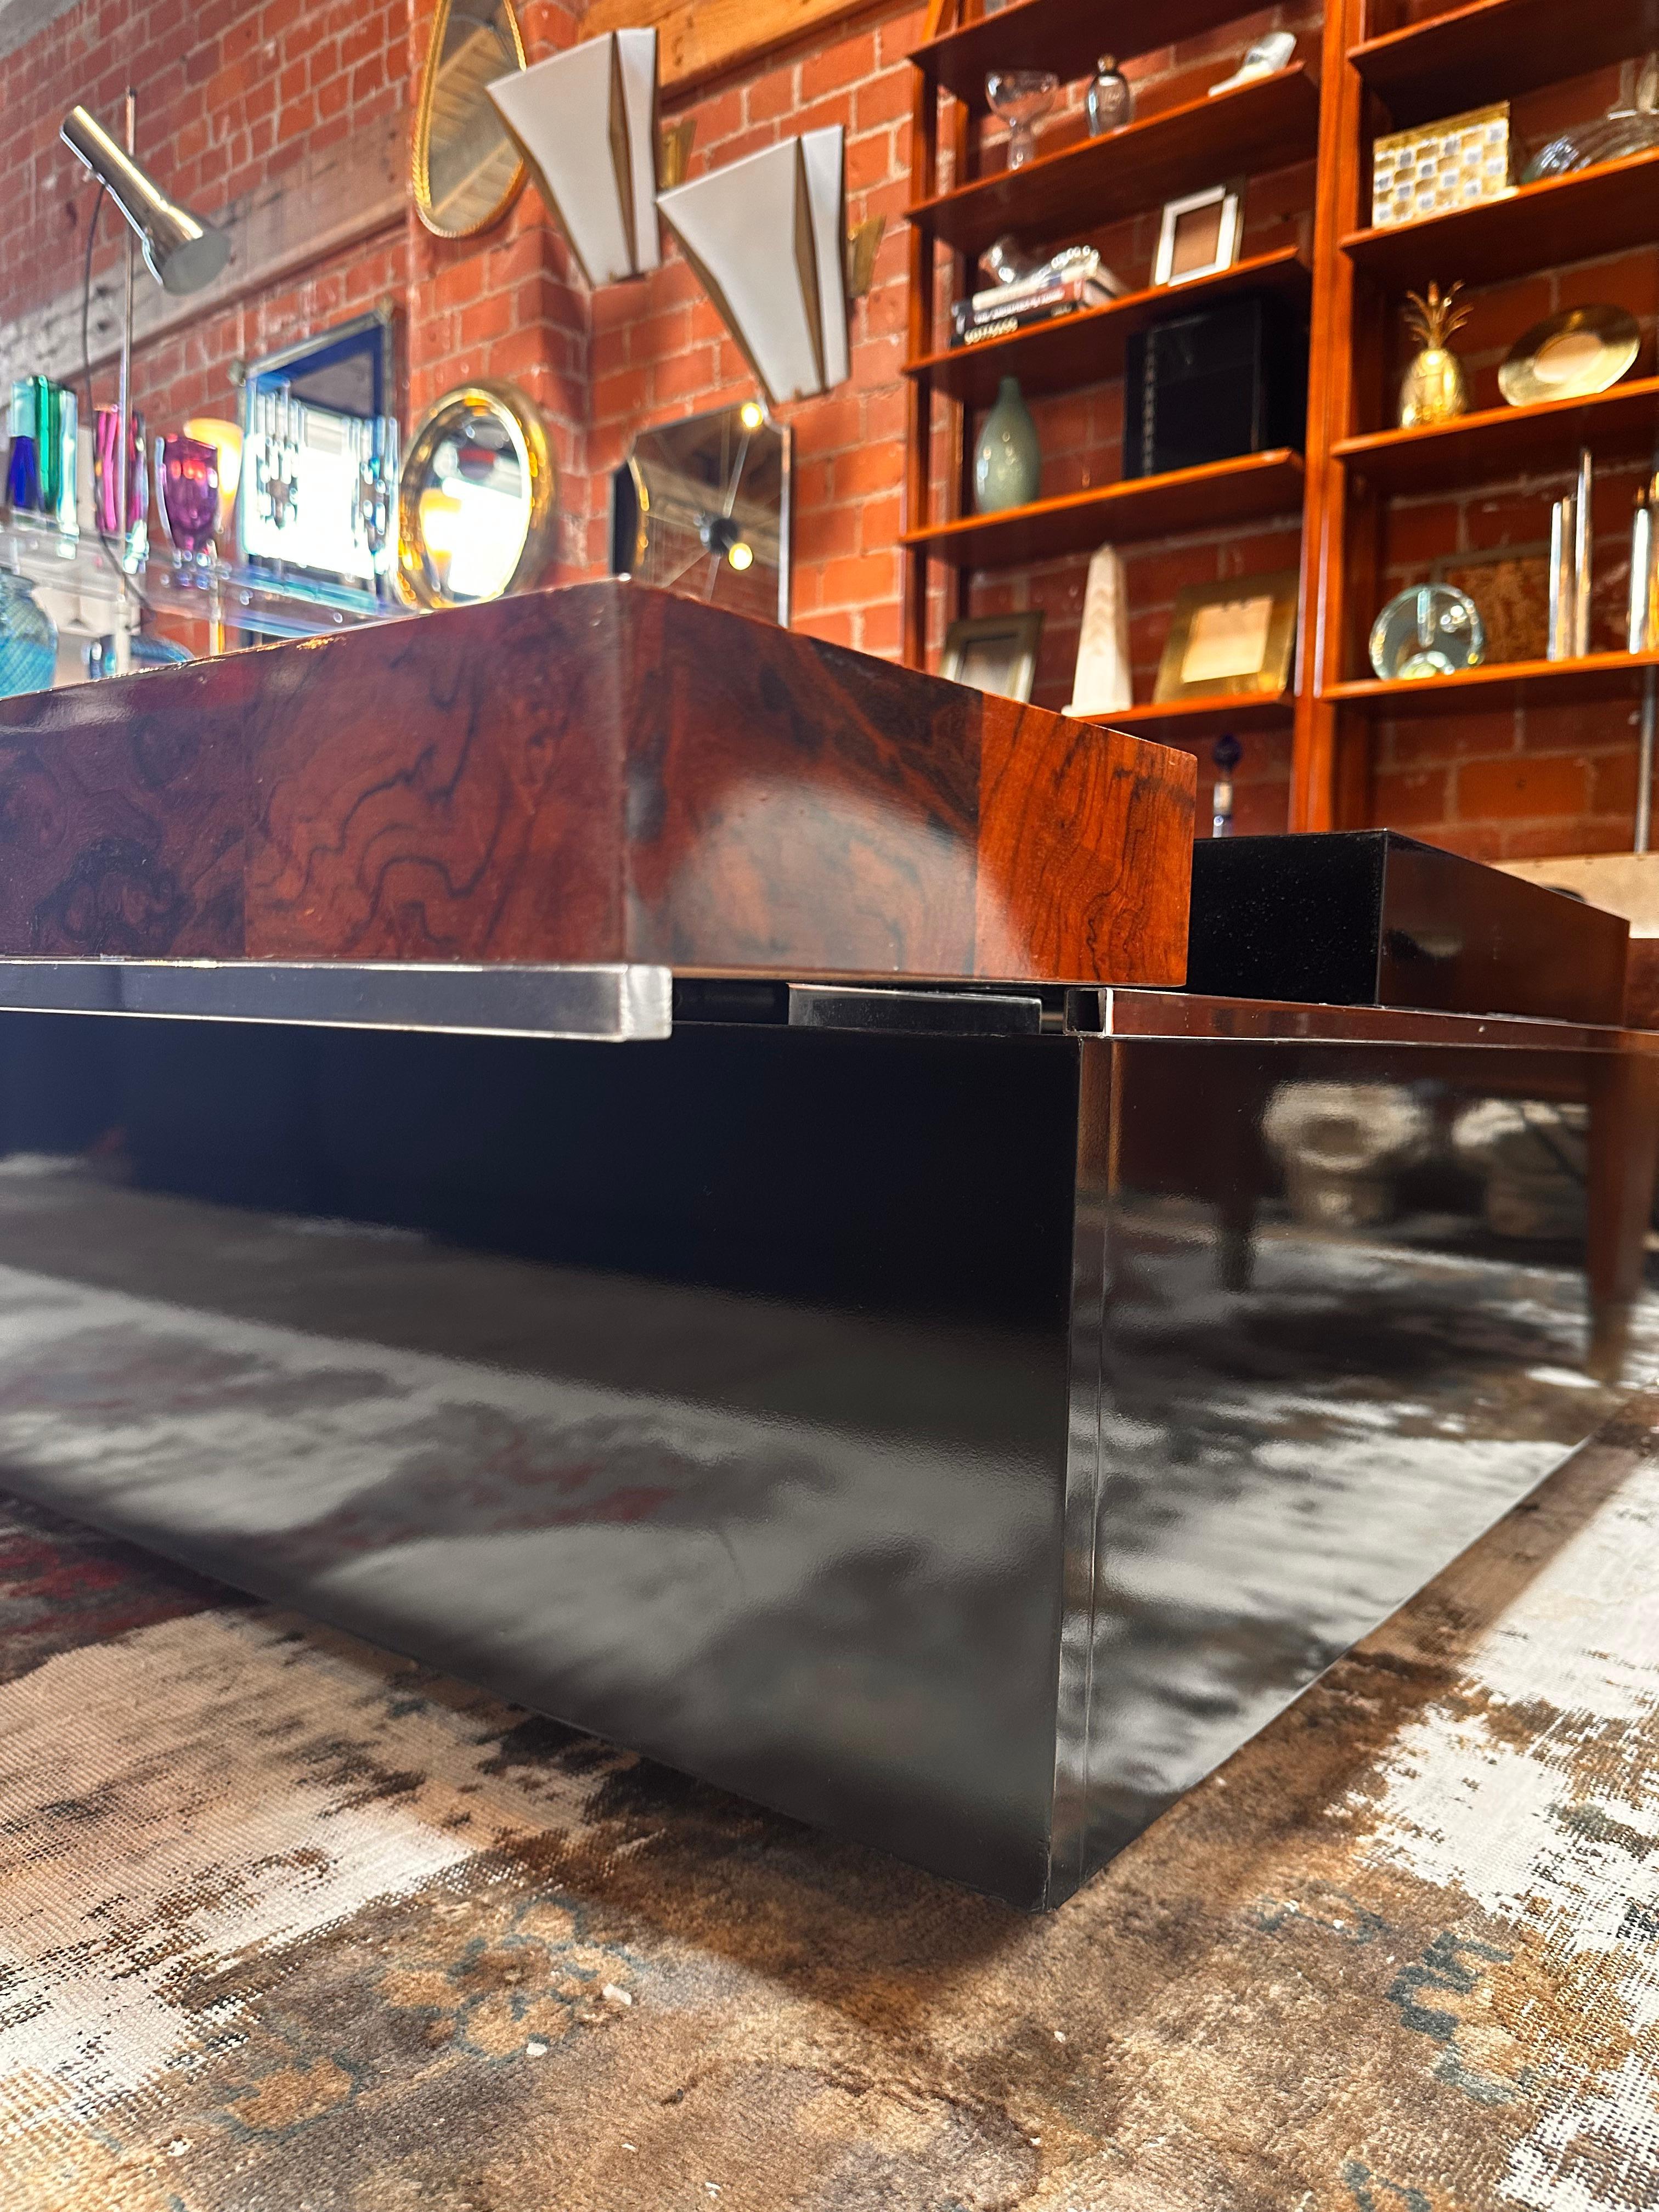 Beautiful Italian Mid century coffee table , the table is in vintage condition and as you can see form the picture the table can be open from both sides.
Nothing touches, nothing clashes, which gives this piece of furniture a completely peaceful yet